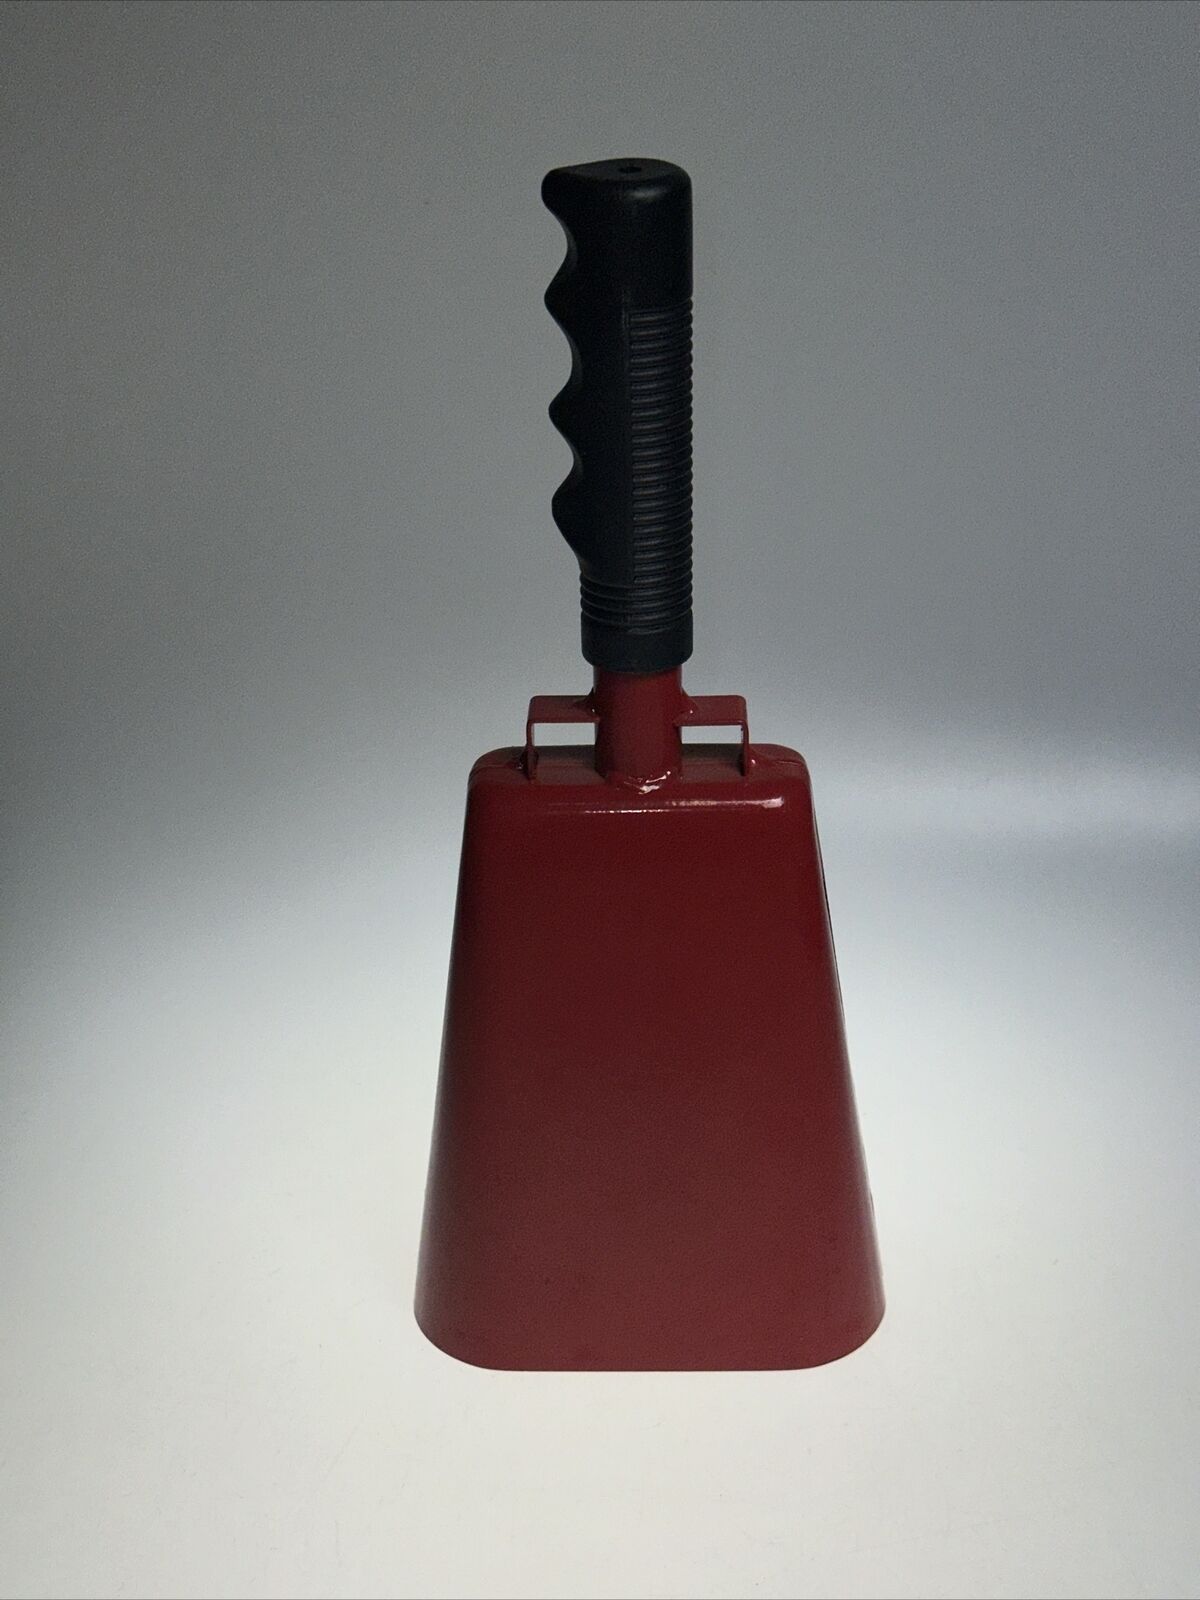 Cow Bell 10 Inch Cowbell Red Metal. 